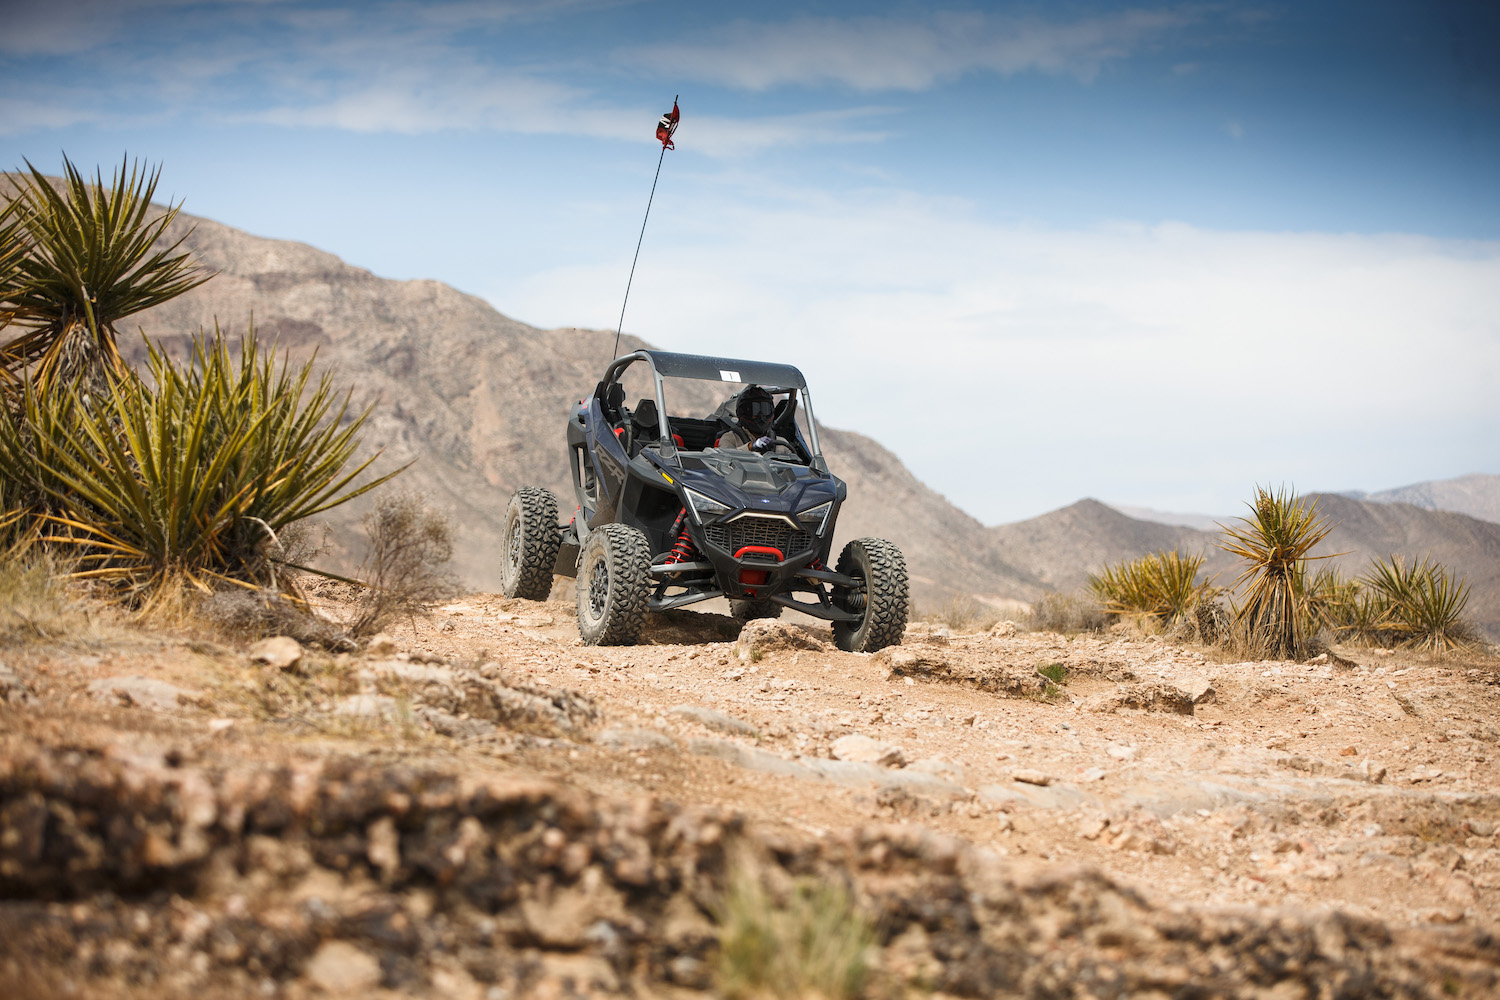 Polaris RZR Pro R going down in a hill on a dirt path in the desert with a mountain in the background.